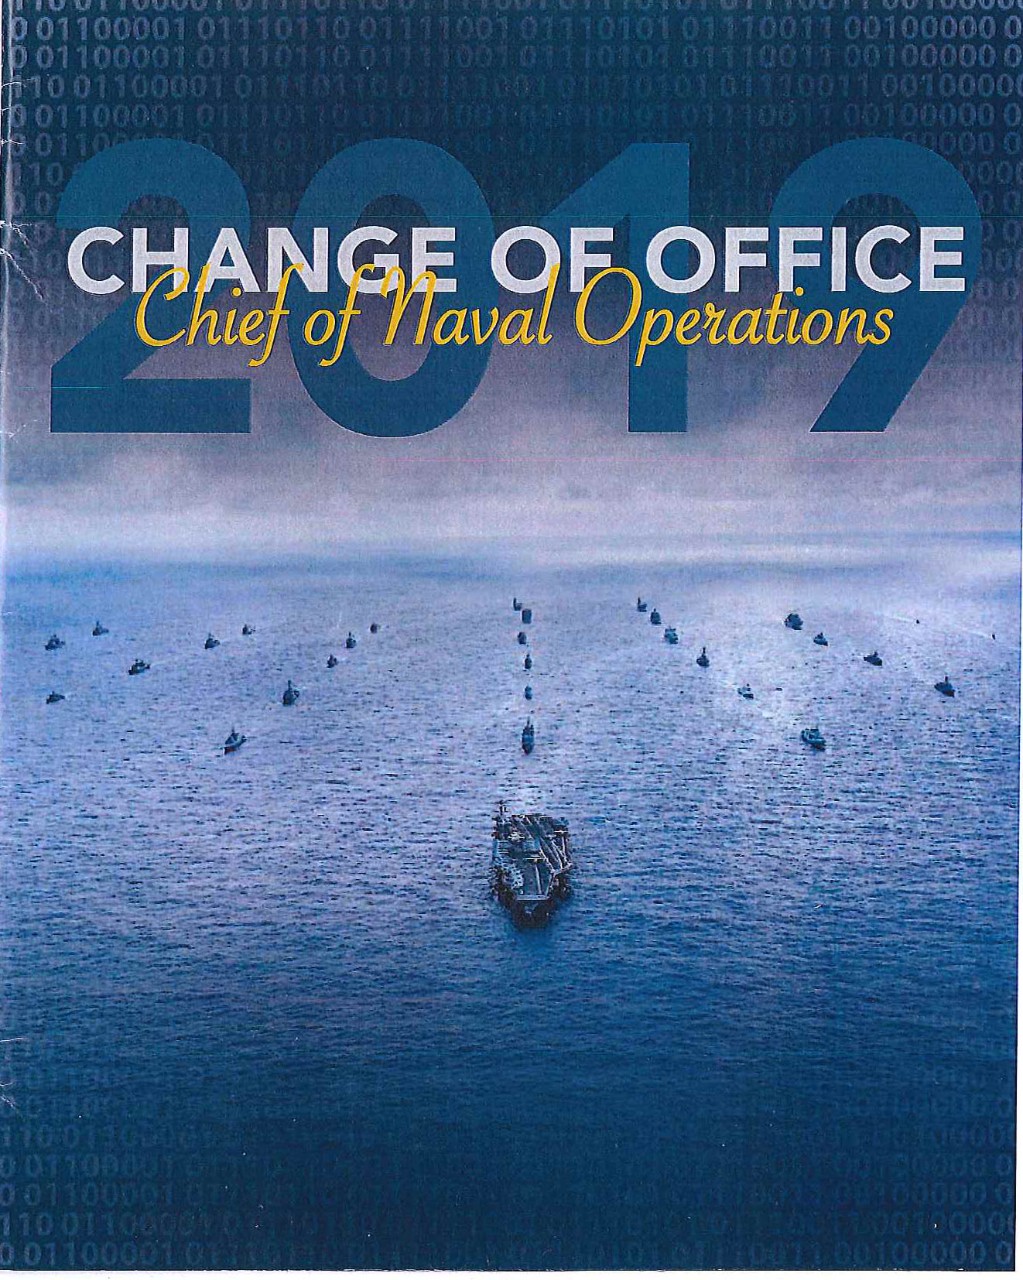 Change of Office 2019 Chief of Naval Operations 